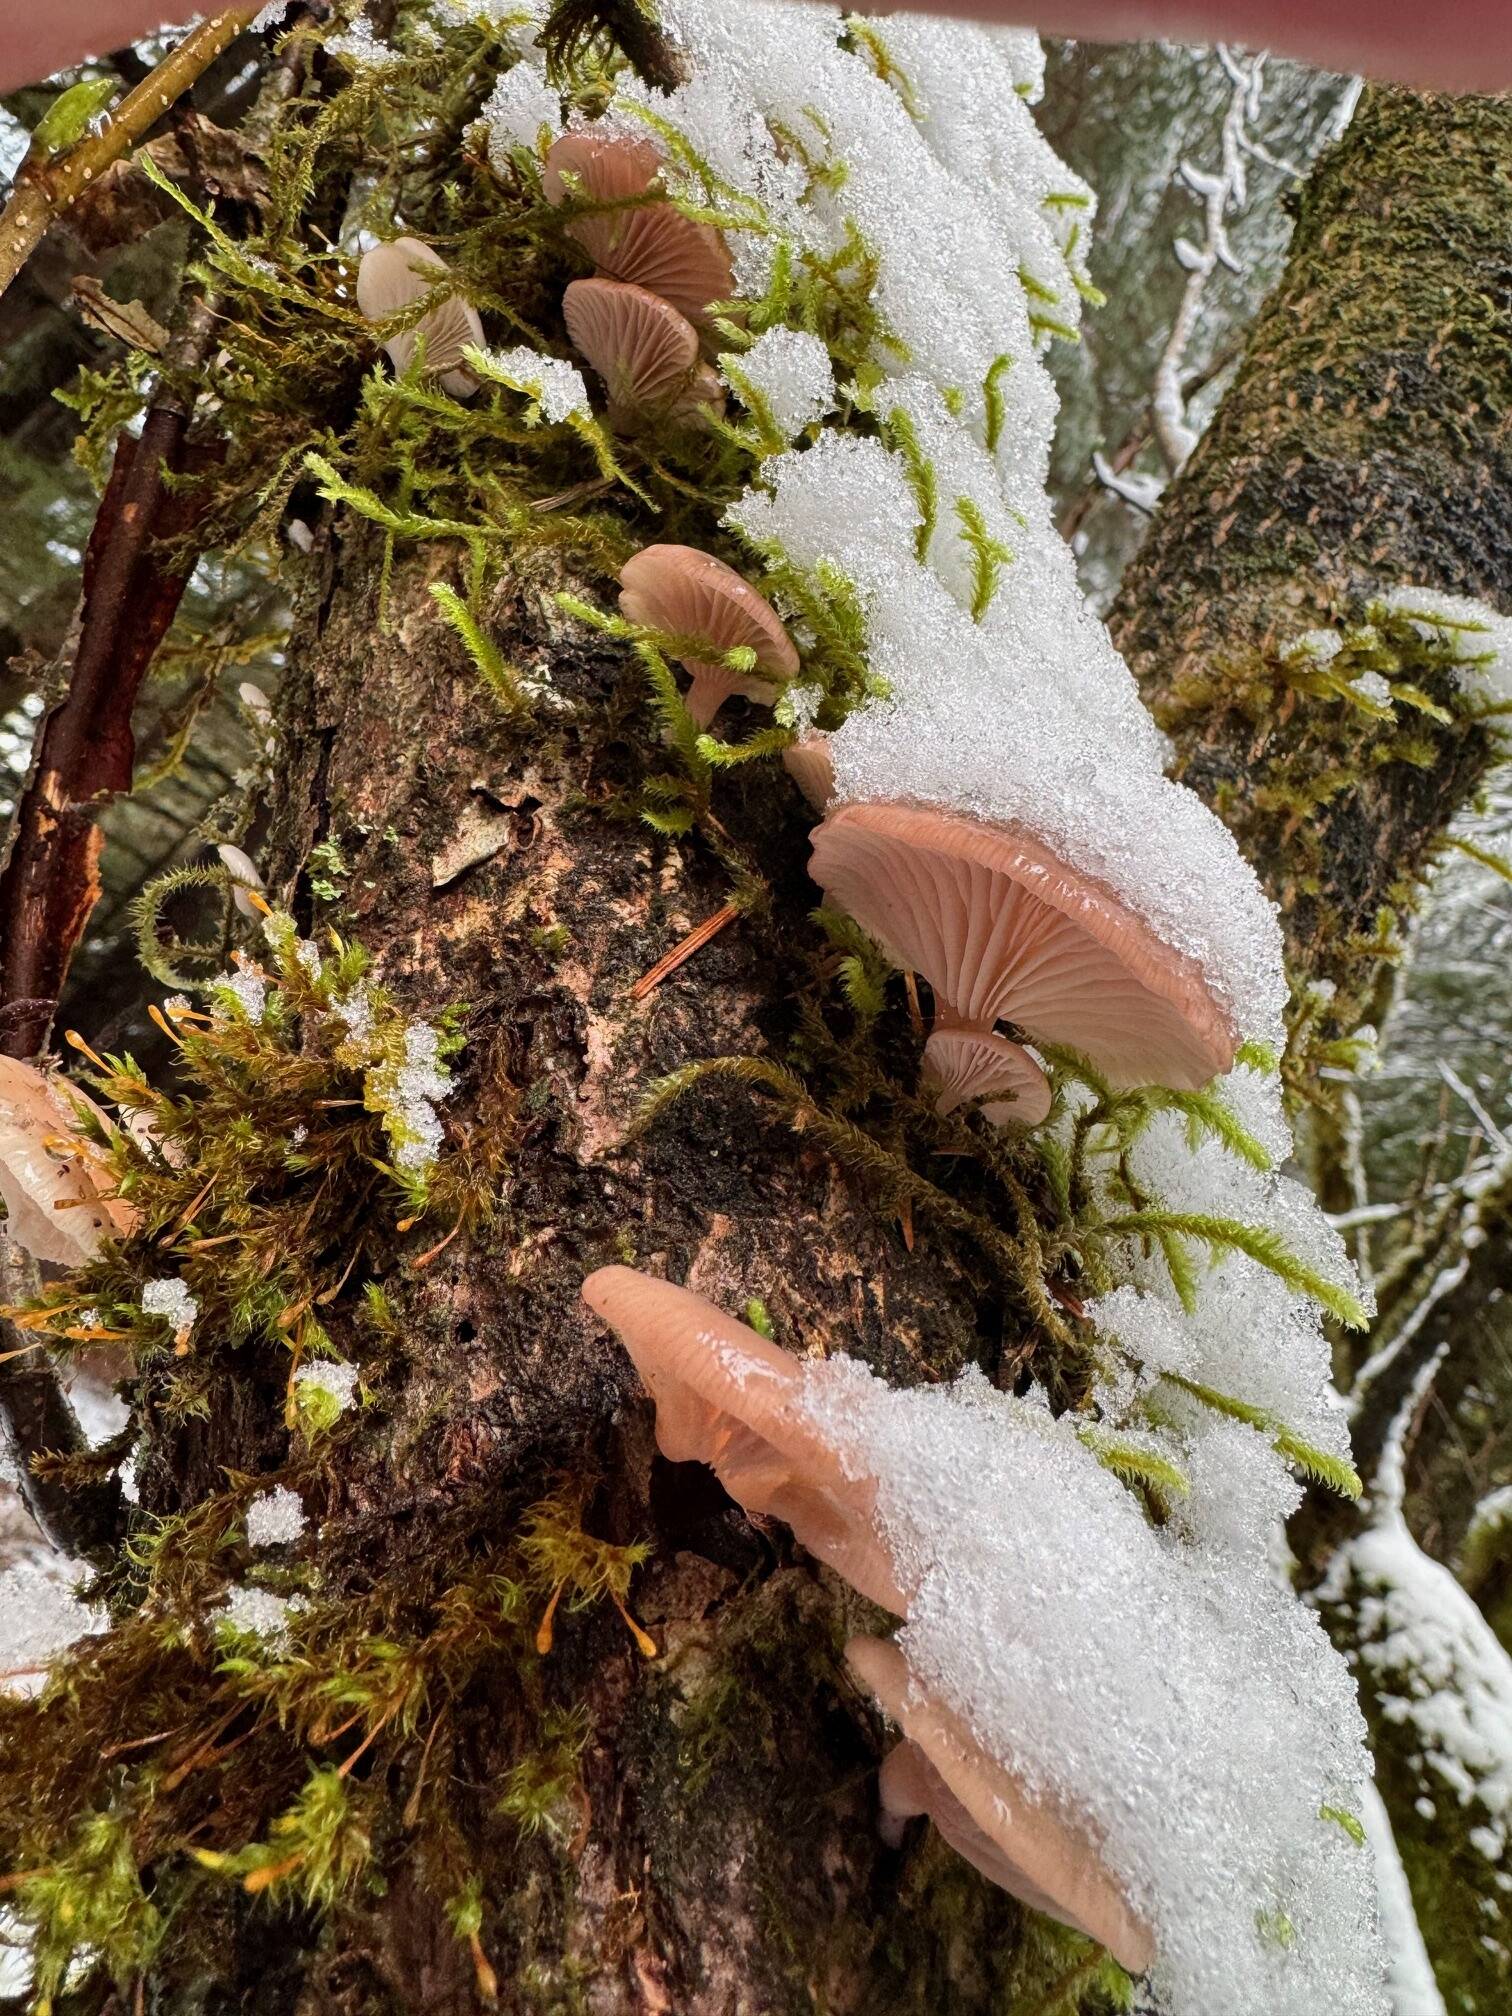 Winter oyster mushrooms survive the cold and snow along the Boy Scout Beach Trail on New Year’s Day. (Photo by Denise Carroll)